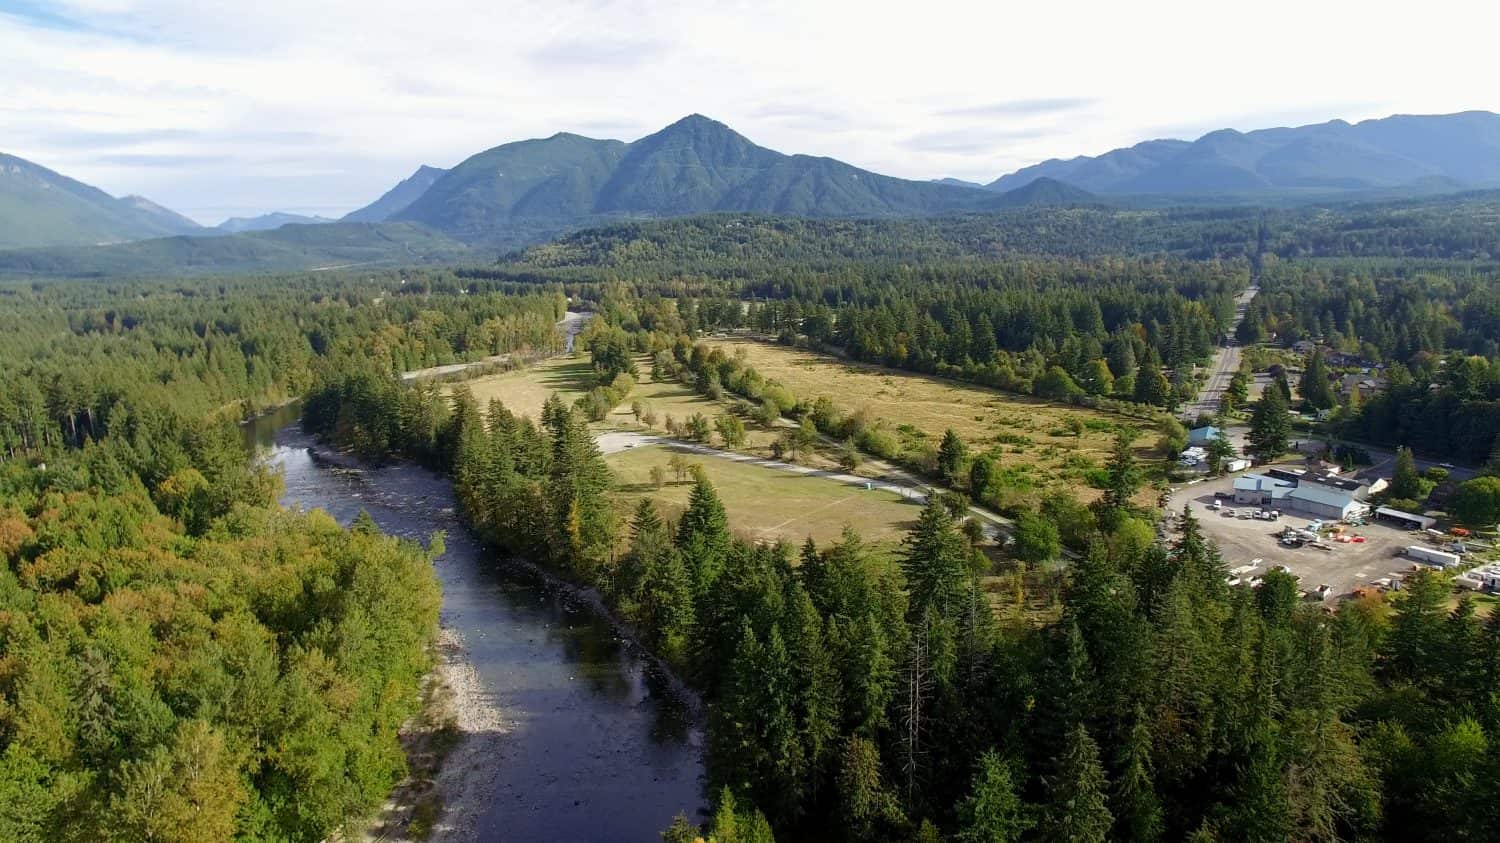 Aerial North Bend, Washington Preacher Mountain and Snoqualmie River View